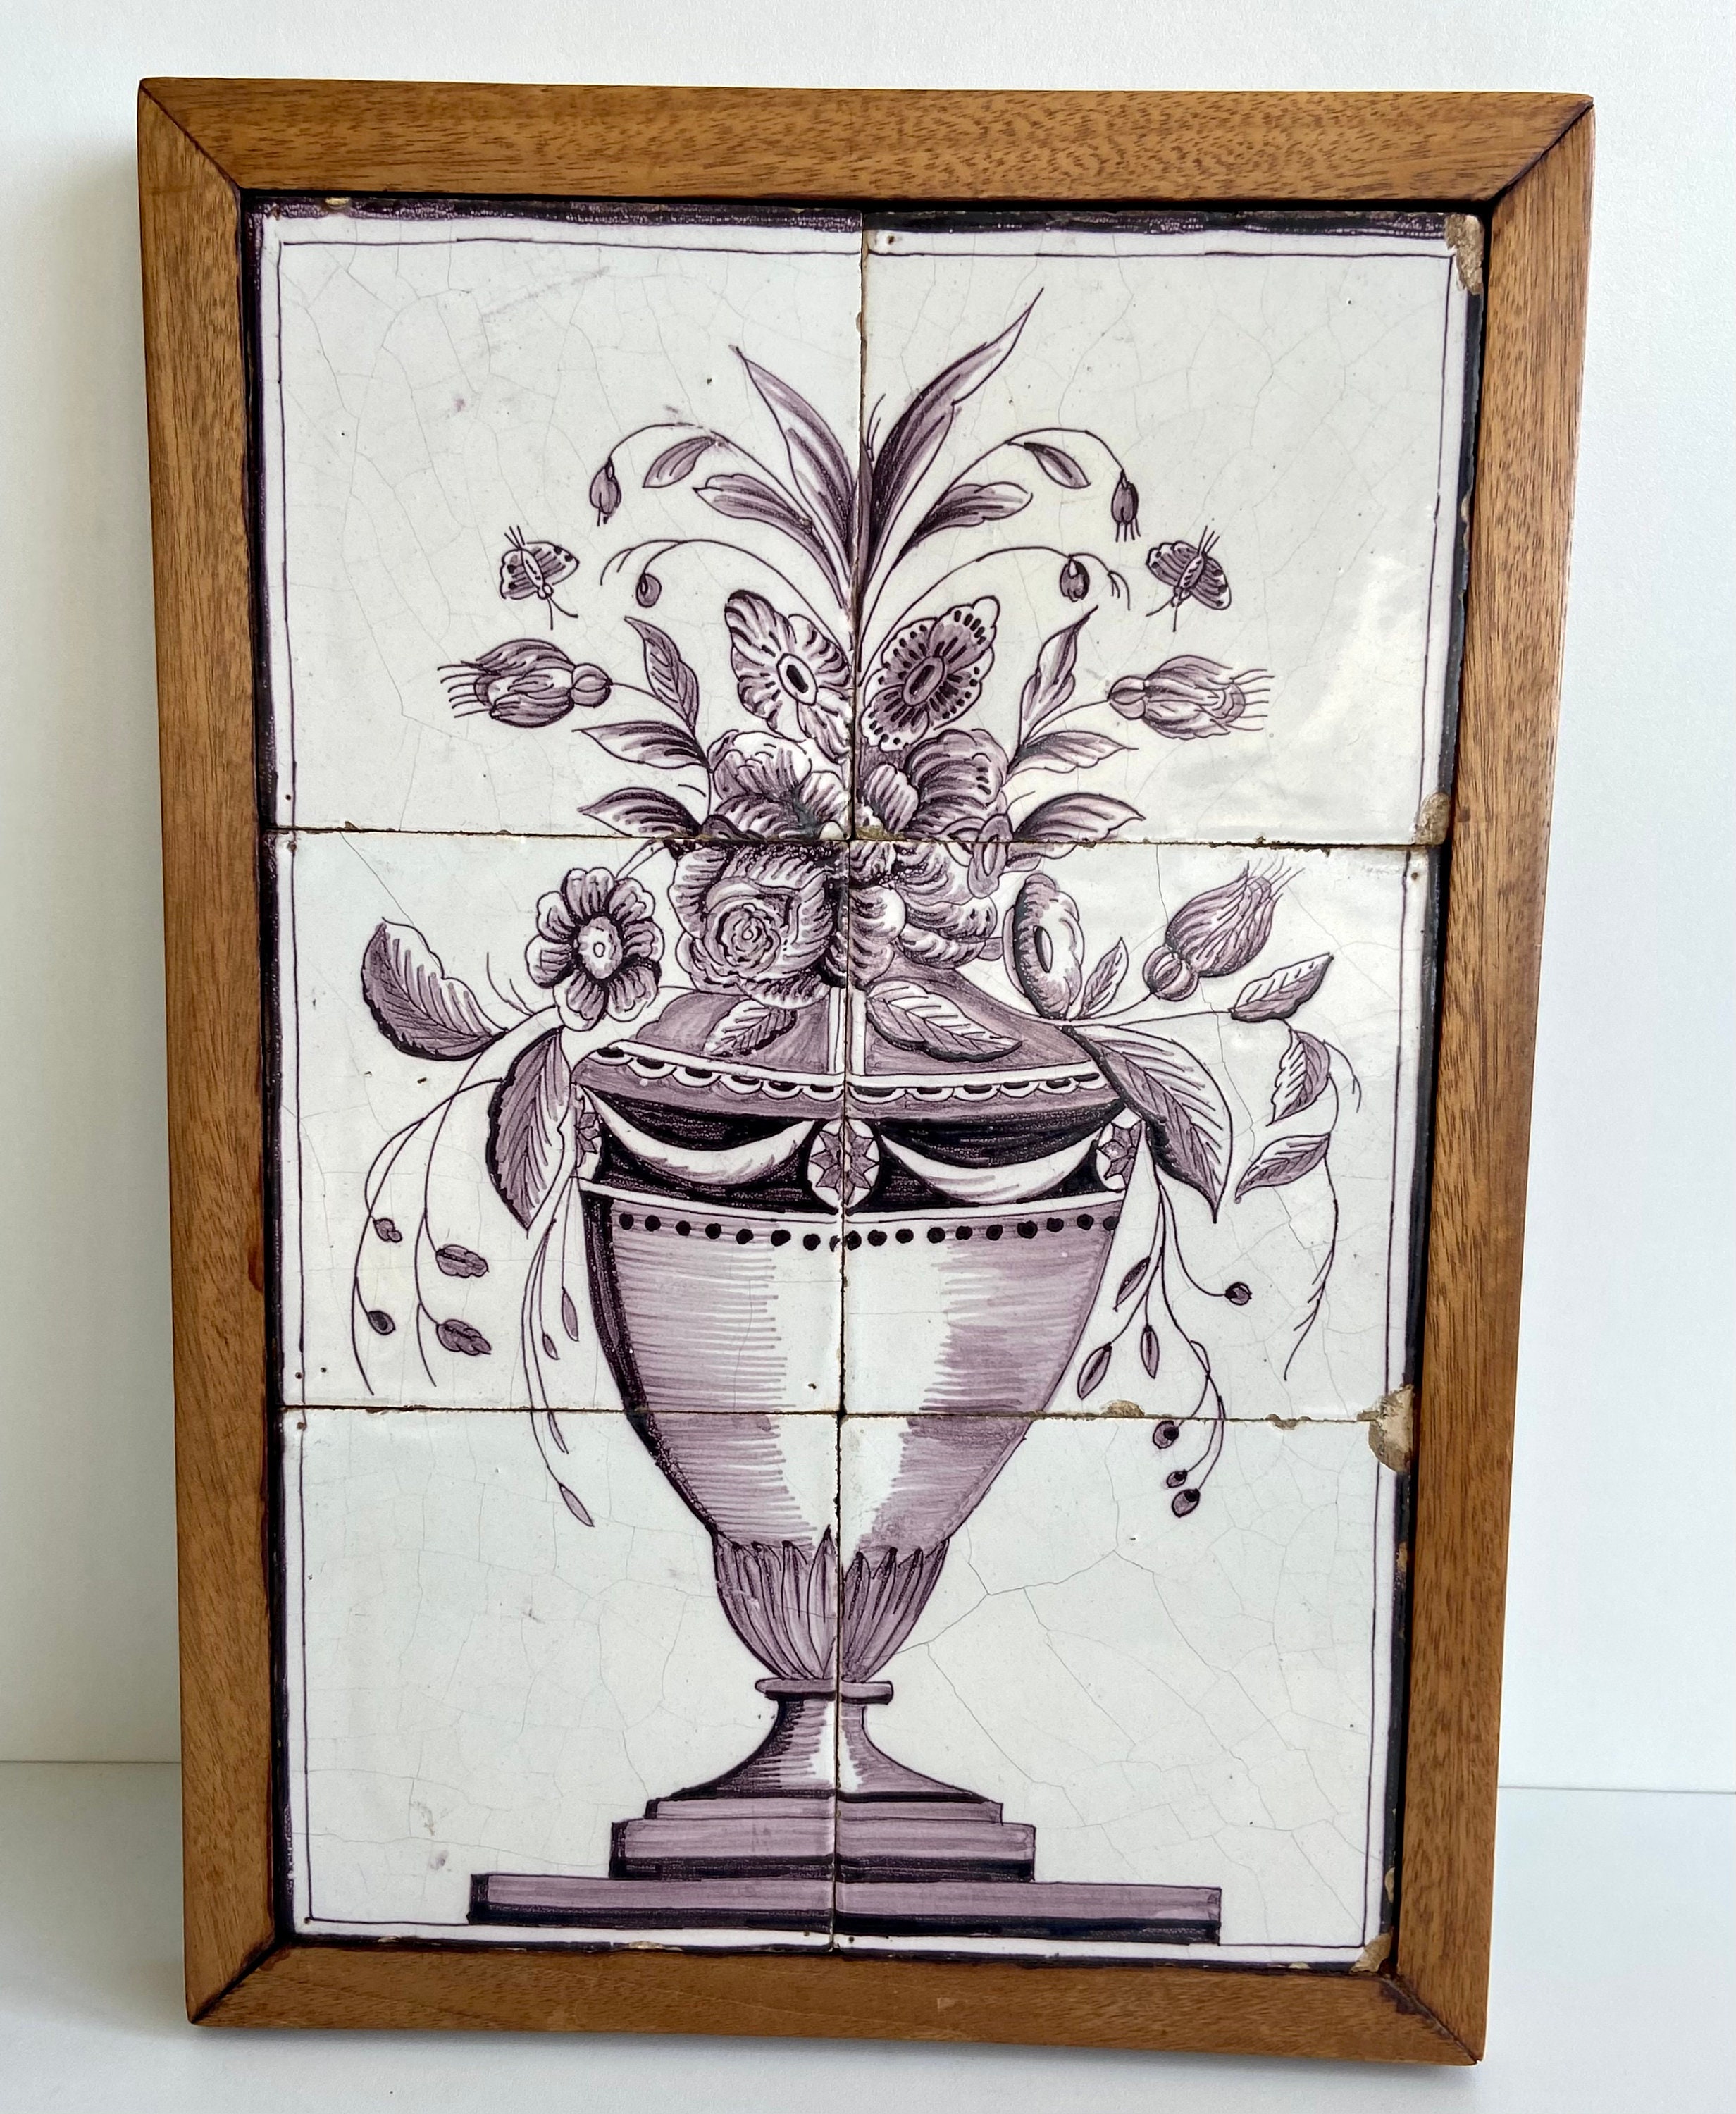 Manganese antique Dutch Delft tile mural with a wonderful flower vase, 18th  century